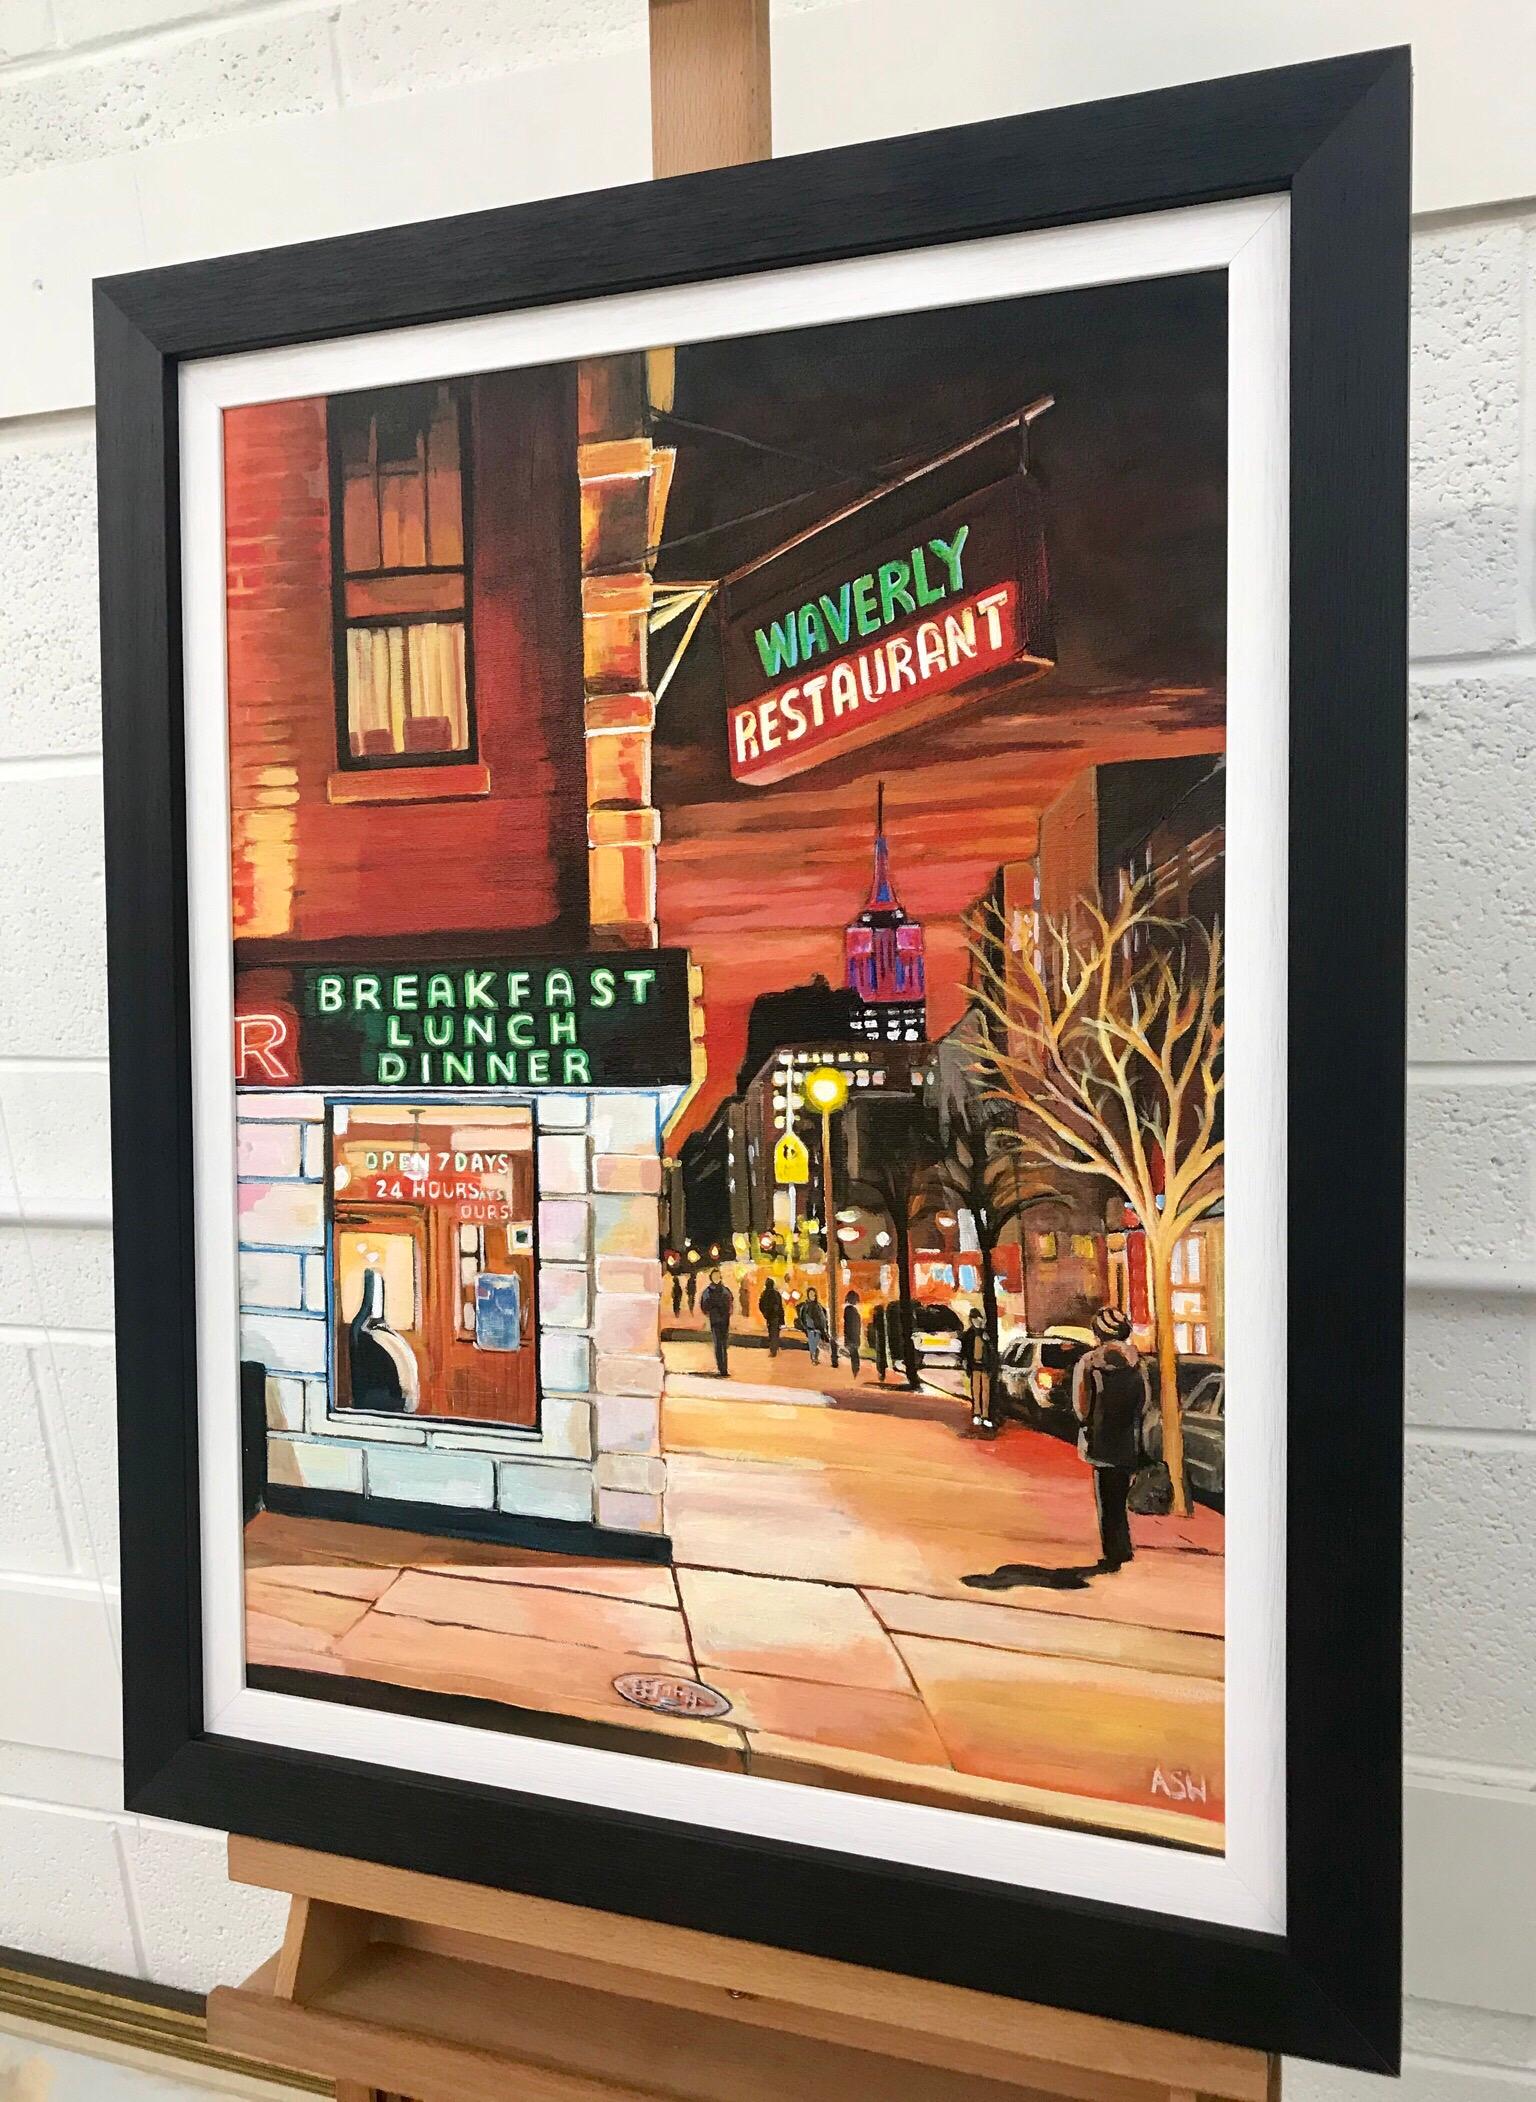 Waverly Diner in Greenwich Village on 6th Avenue Street Corner, New York City, by Leading British Urban Landscape Artist, Angela Wakefield. The Empire State Building can be seen in the background in this depiction of a classic American Diner